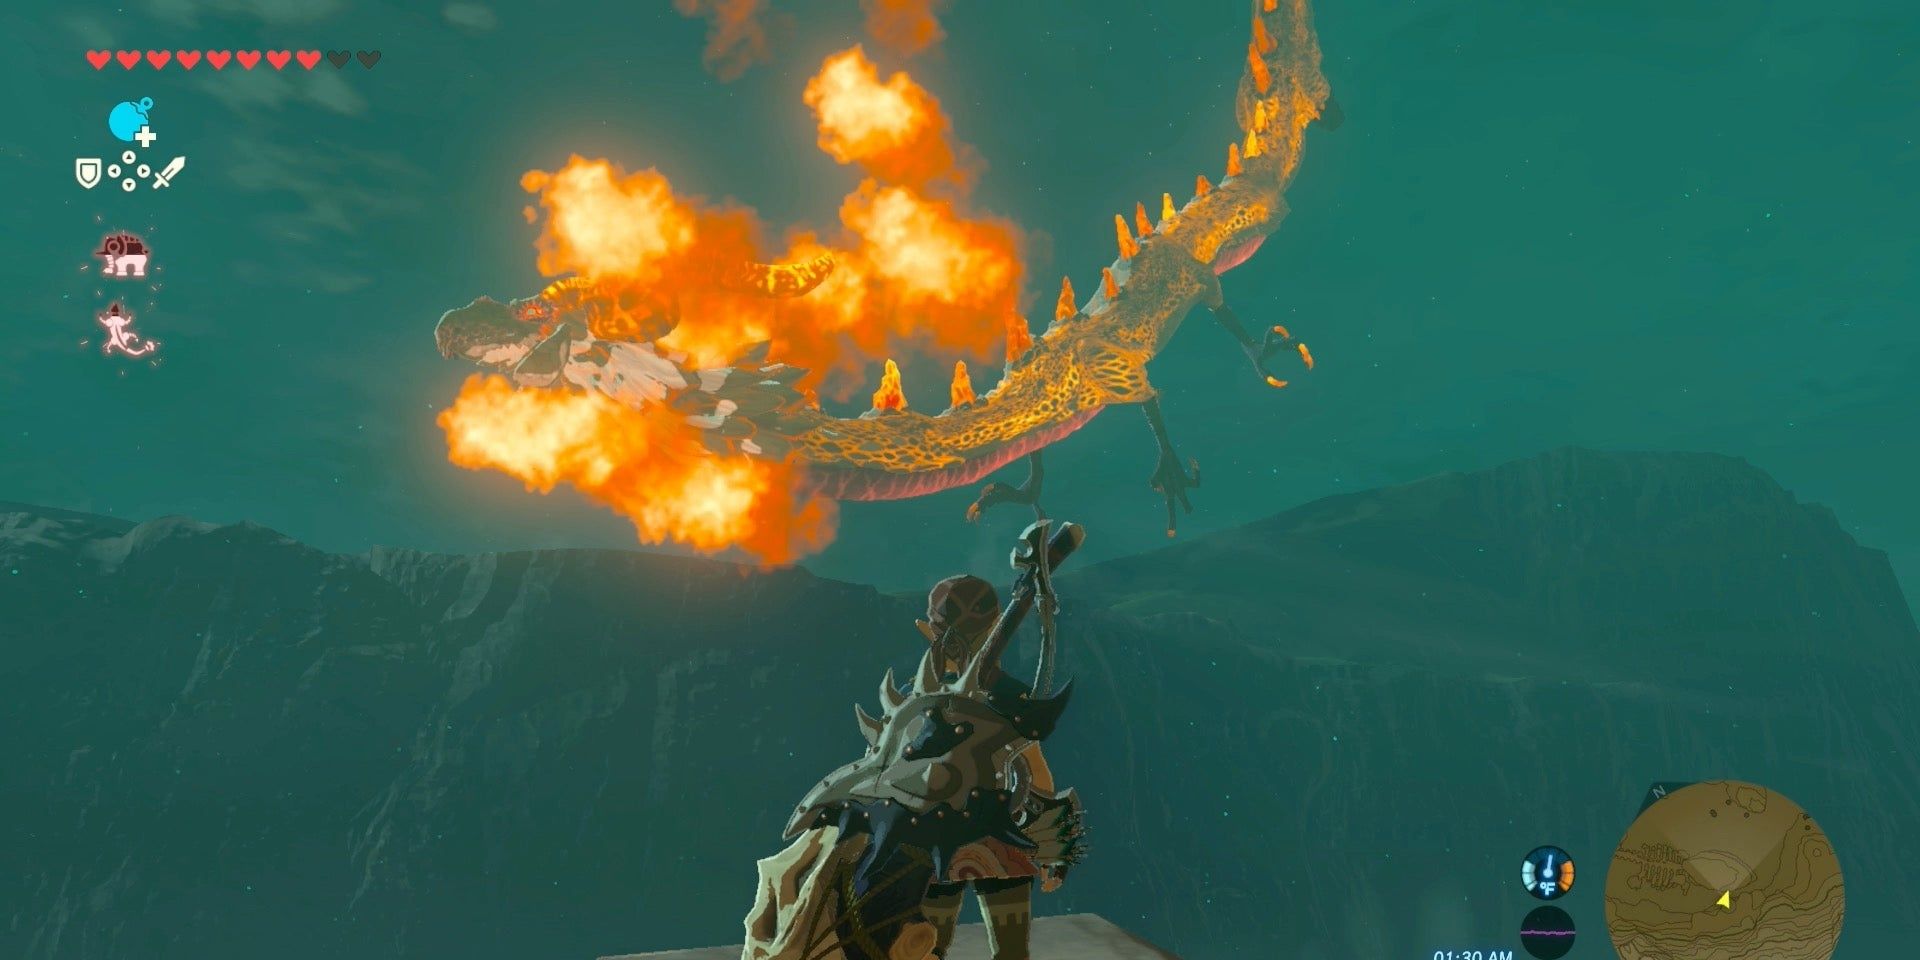 Link shooting an arrow at the dragon Dinraal in The Legend of Zelda: Breath of the Wild